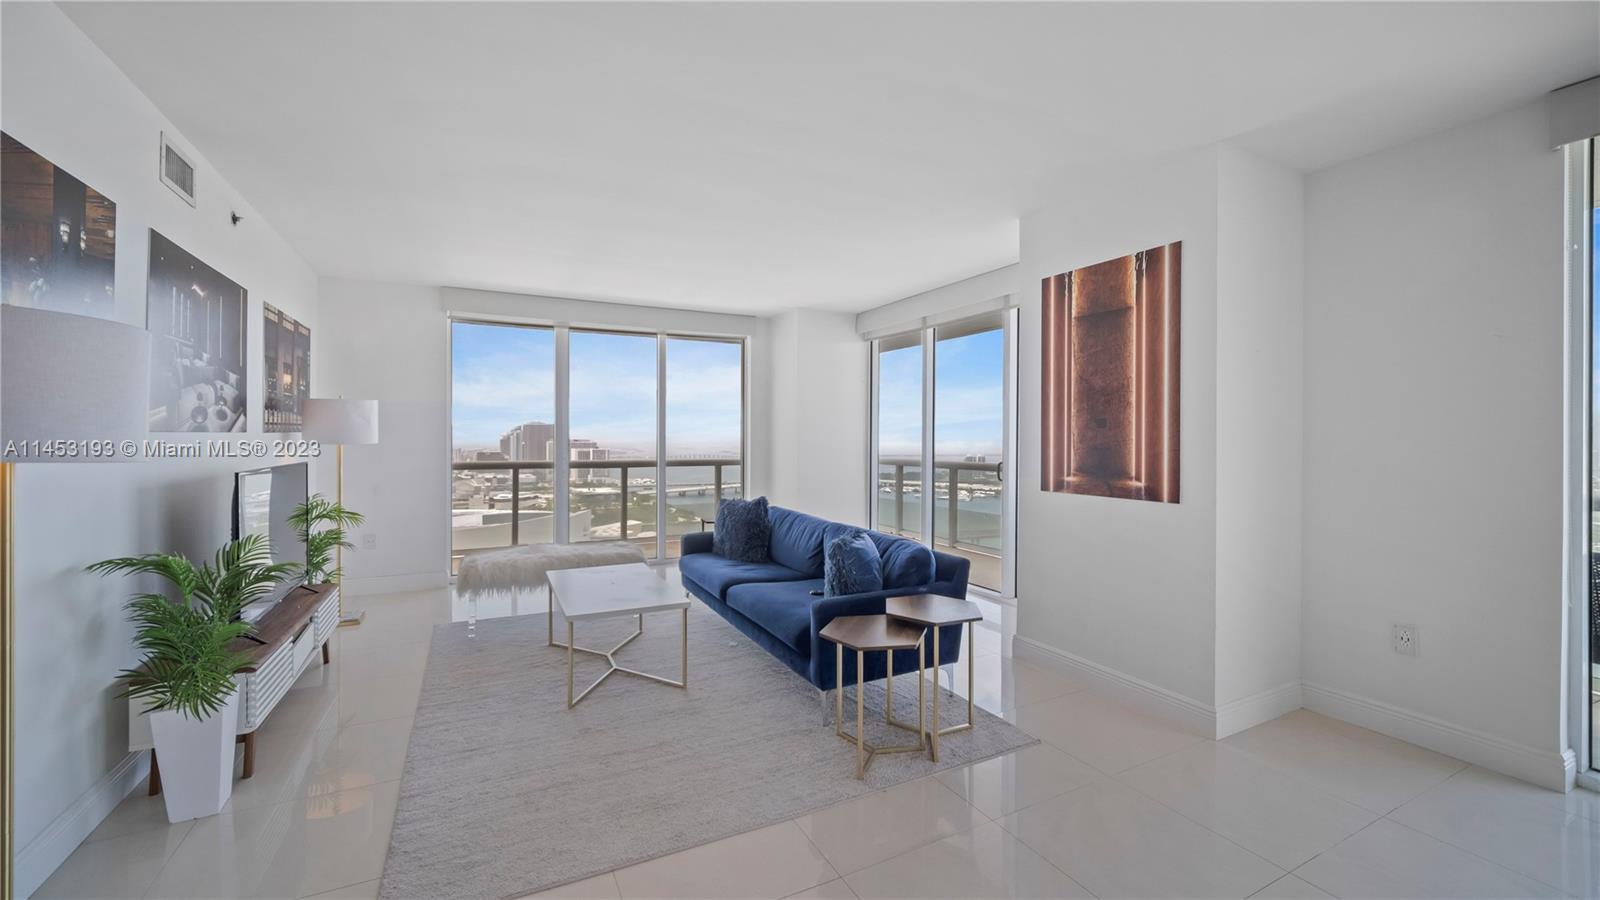 Beautiful corner apartment located in the heart of Downtown Miami. Features include porcelain tile floors, stainless steel appliances, split bedrooms, walk-in-closets in all bedrooms, jack and jill bathroom and more. Floor to ceiling windows allow you to appreciate the stunning unobstructed views of the bay. All bedrooms have access to the glass wrap around balcony. Resort like amenities begin on the tenth floor and features a luxurious pool deck, cabanas, two level clubroom and outdoor seating area. The fitness center and spa are located on the twelve floor with spectacular views of Miami. The apartment is furnished but can be rented unfurnished upon request. Steps away from Bayfront Park & Bayfront Park Metromover Station. Minutes away from FTX Arena, PAMM Museum & Brickell City Centre.